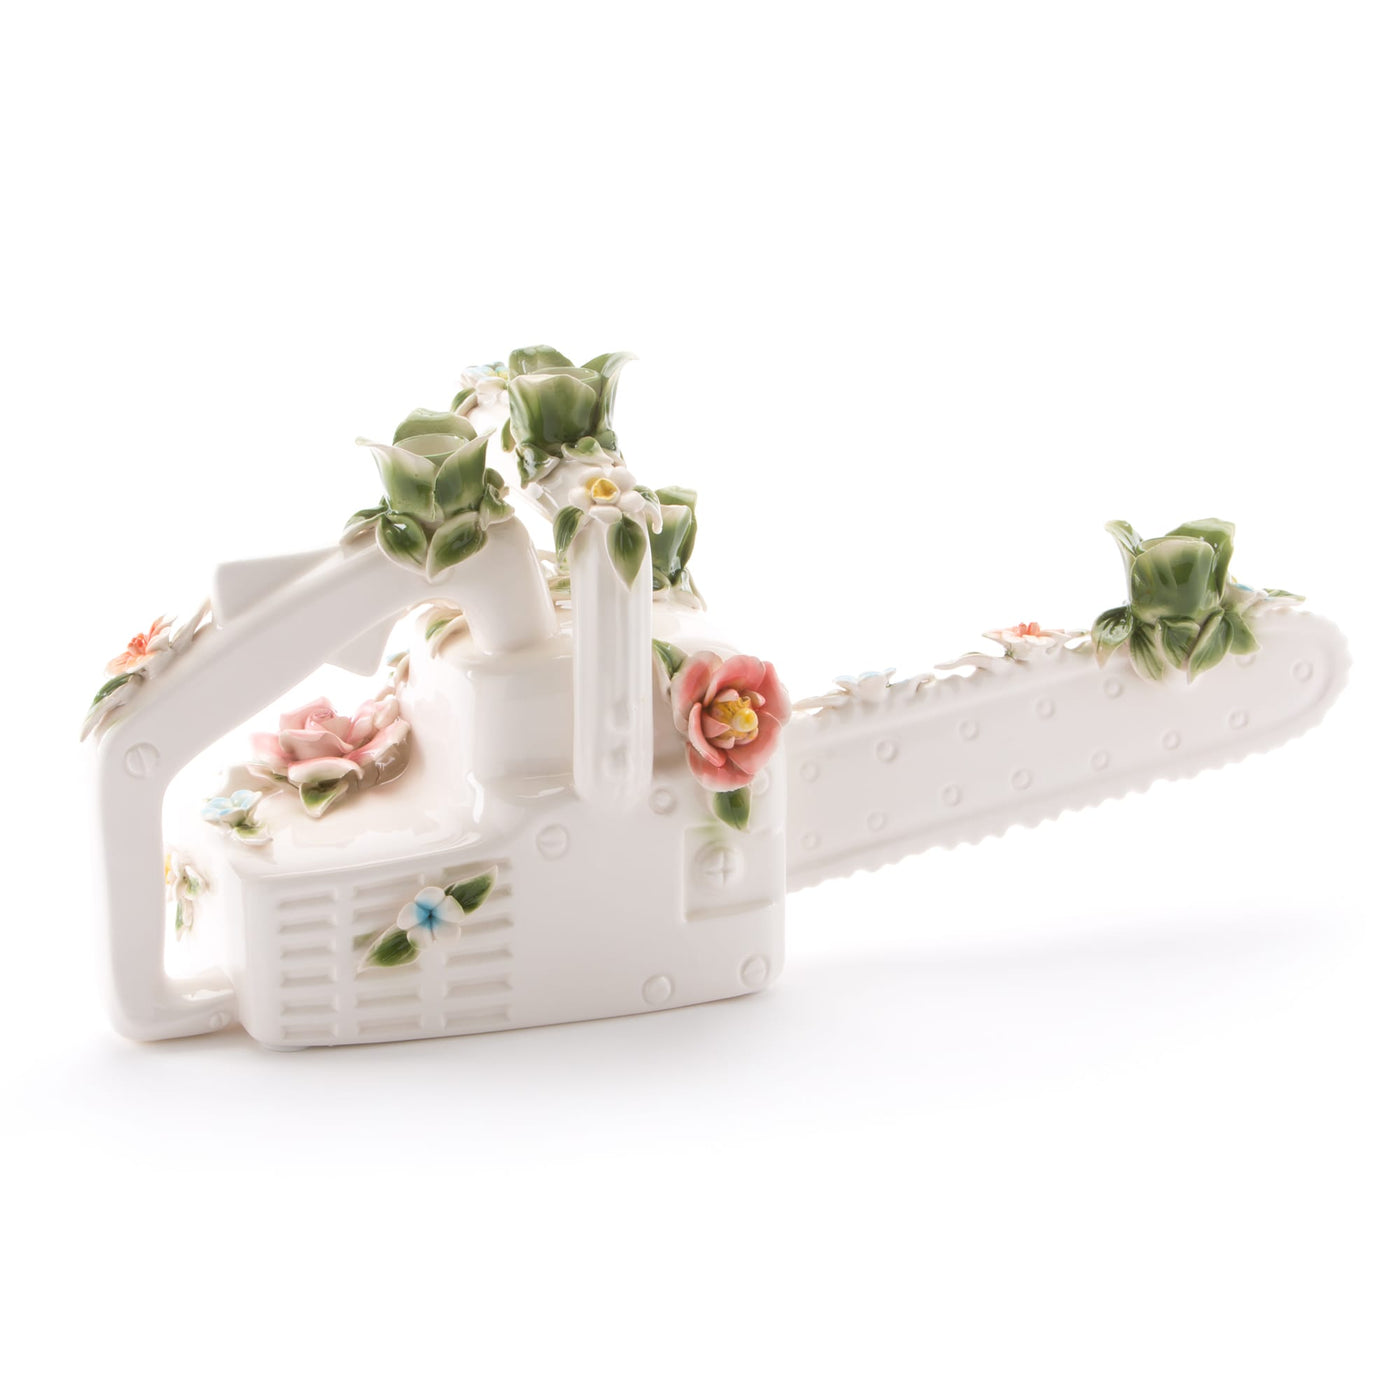 The Chainsaw Ceramic Flower Candle Holder